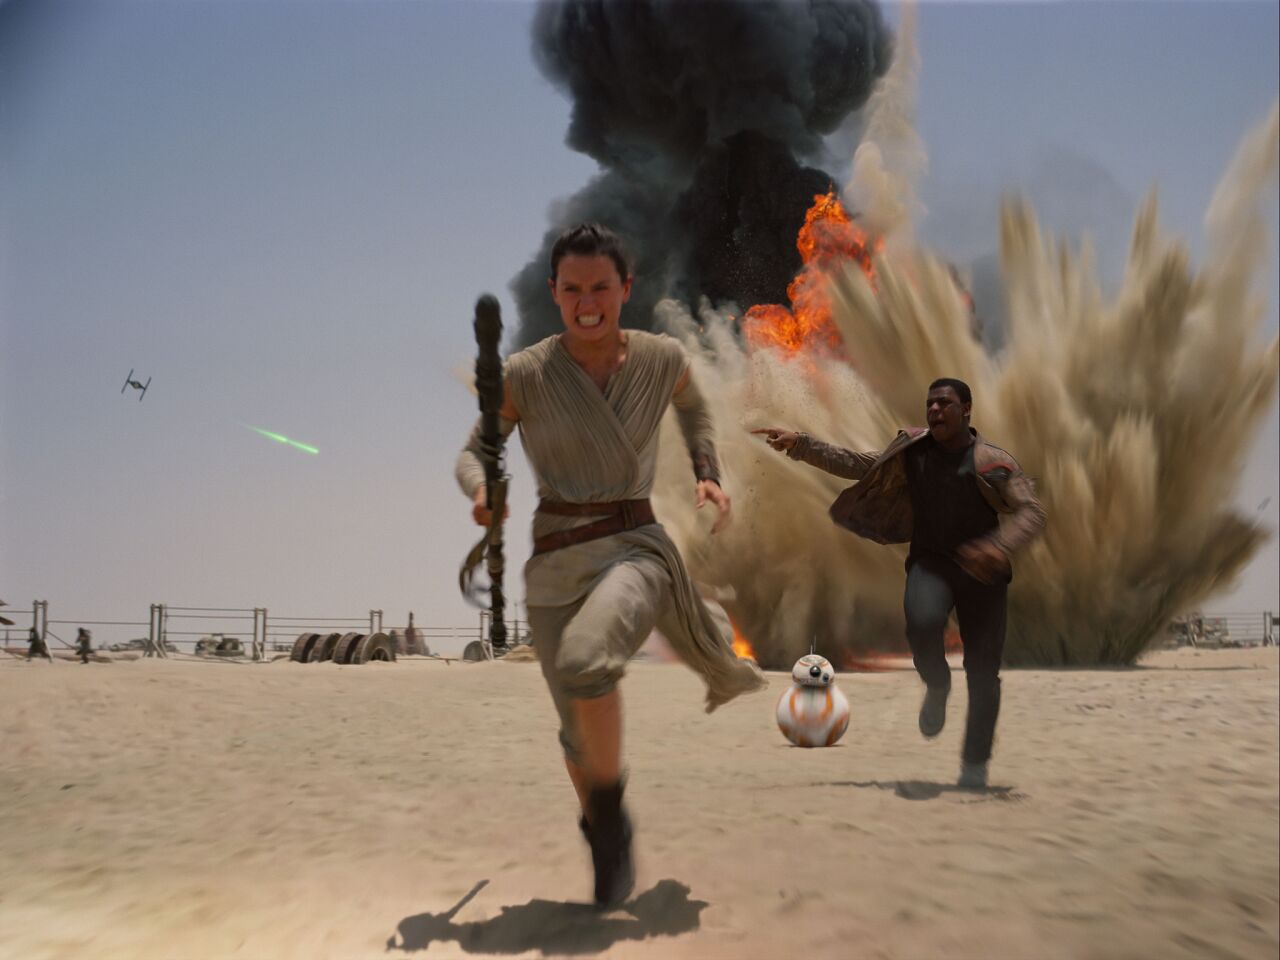 Rey (Daisy Ridley), left, the pint-sized droid BB-8, and Finn (John Boyega) make a break for it in a scene from "The Force Awakens."